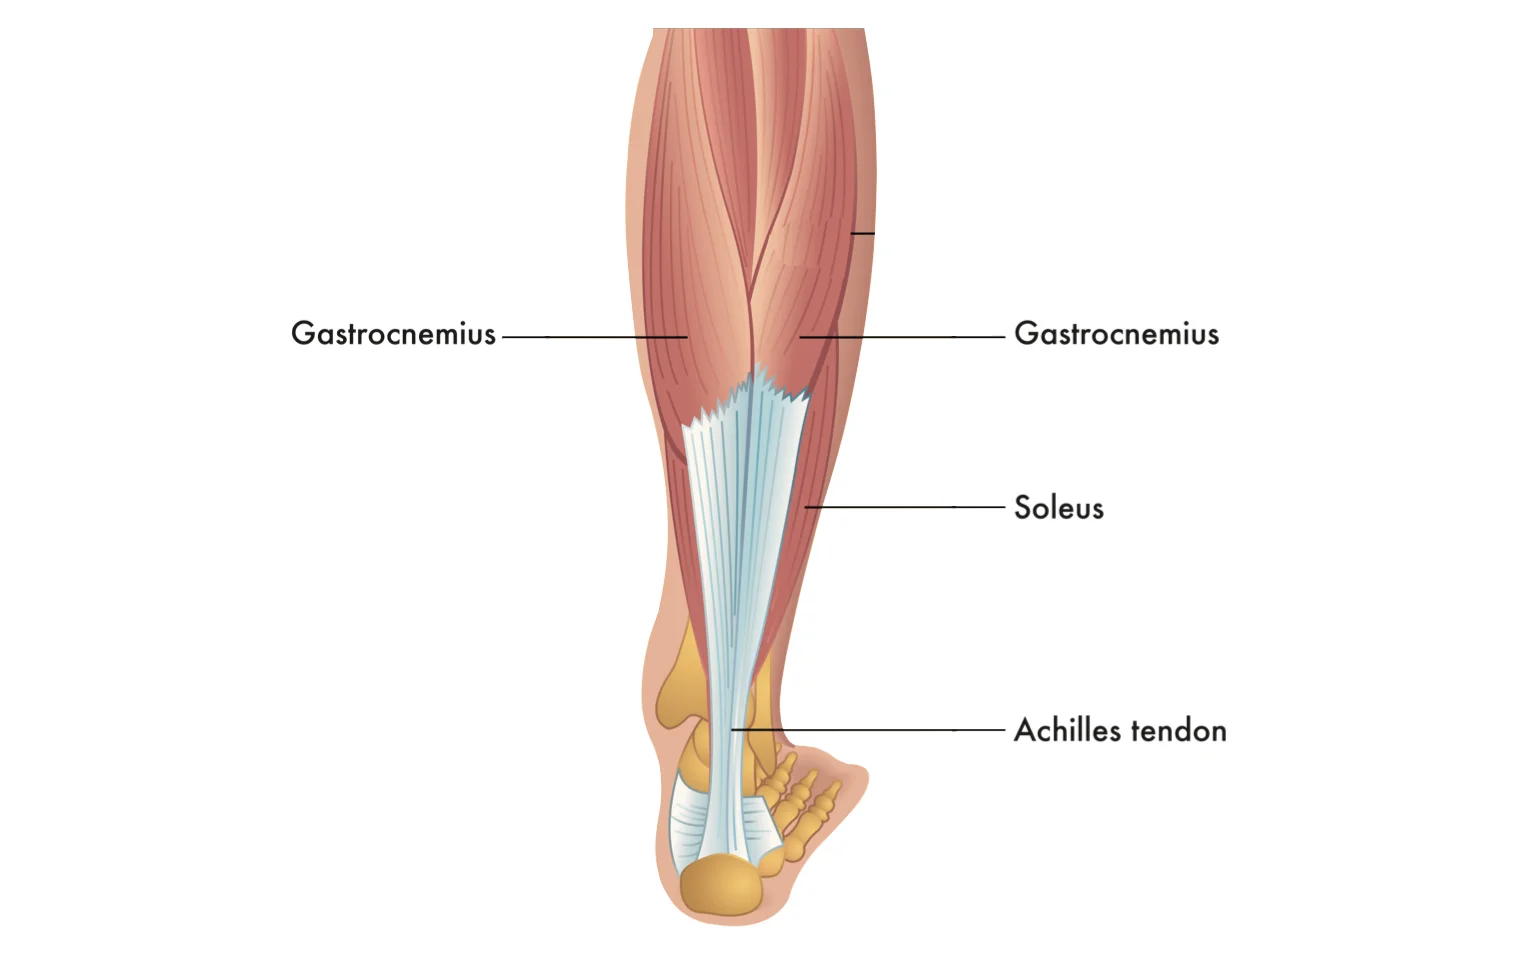 Anatomy of the calf muscle, showing the gastrocnemius muscle, soleus muscle and Achilles tendon